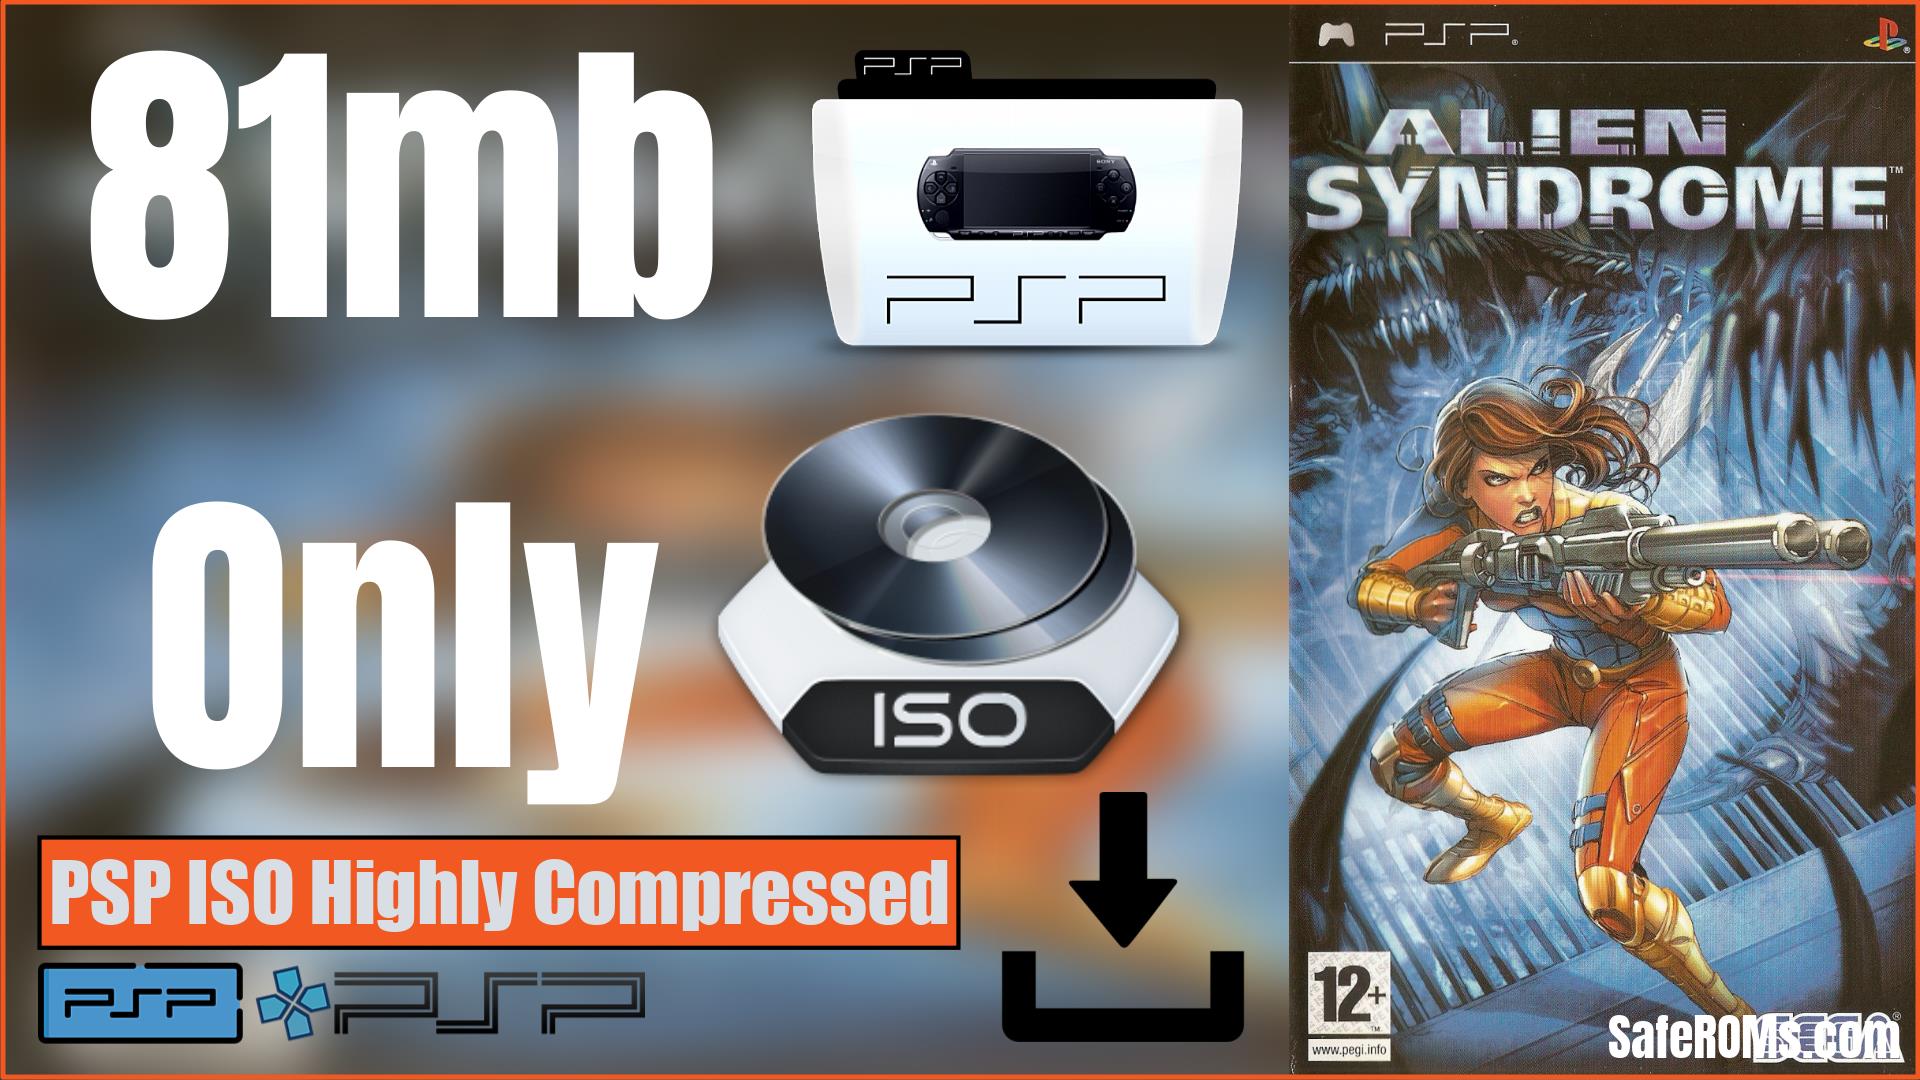 Alien Syndrome PSP ISO Highly Compressed